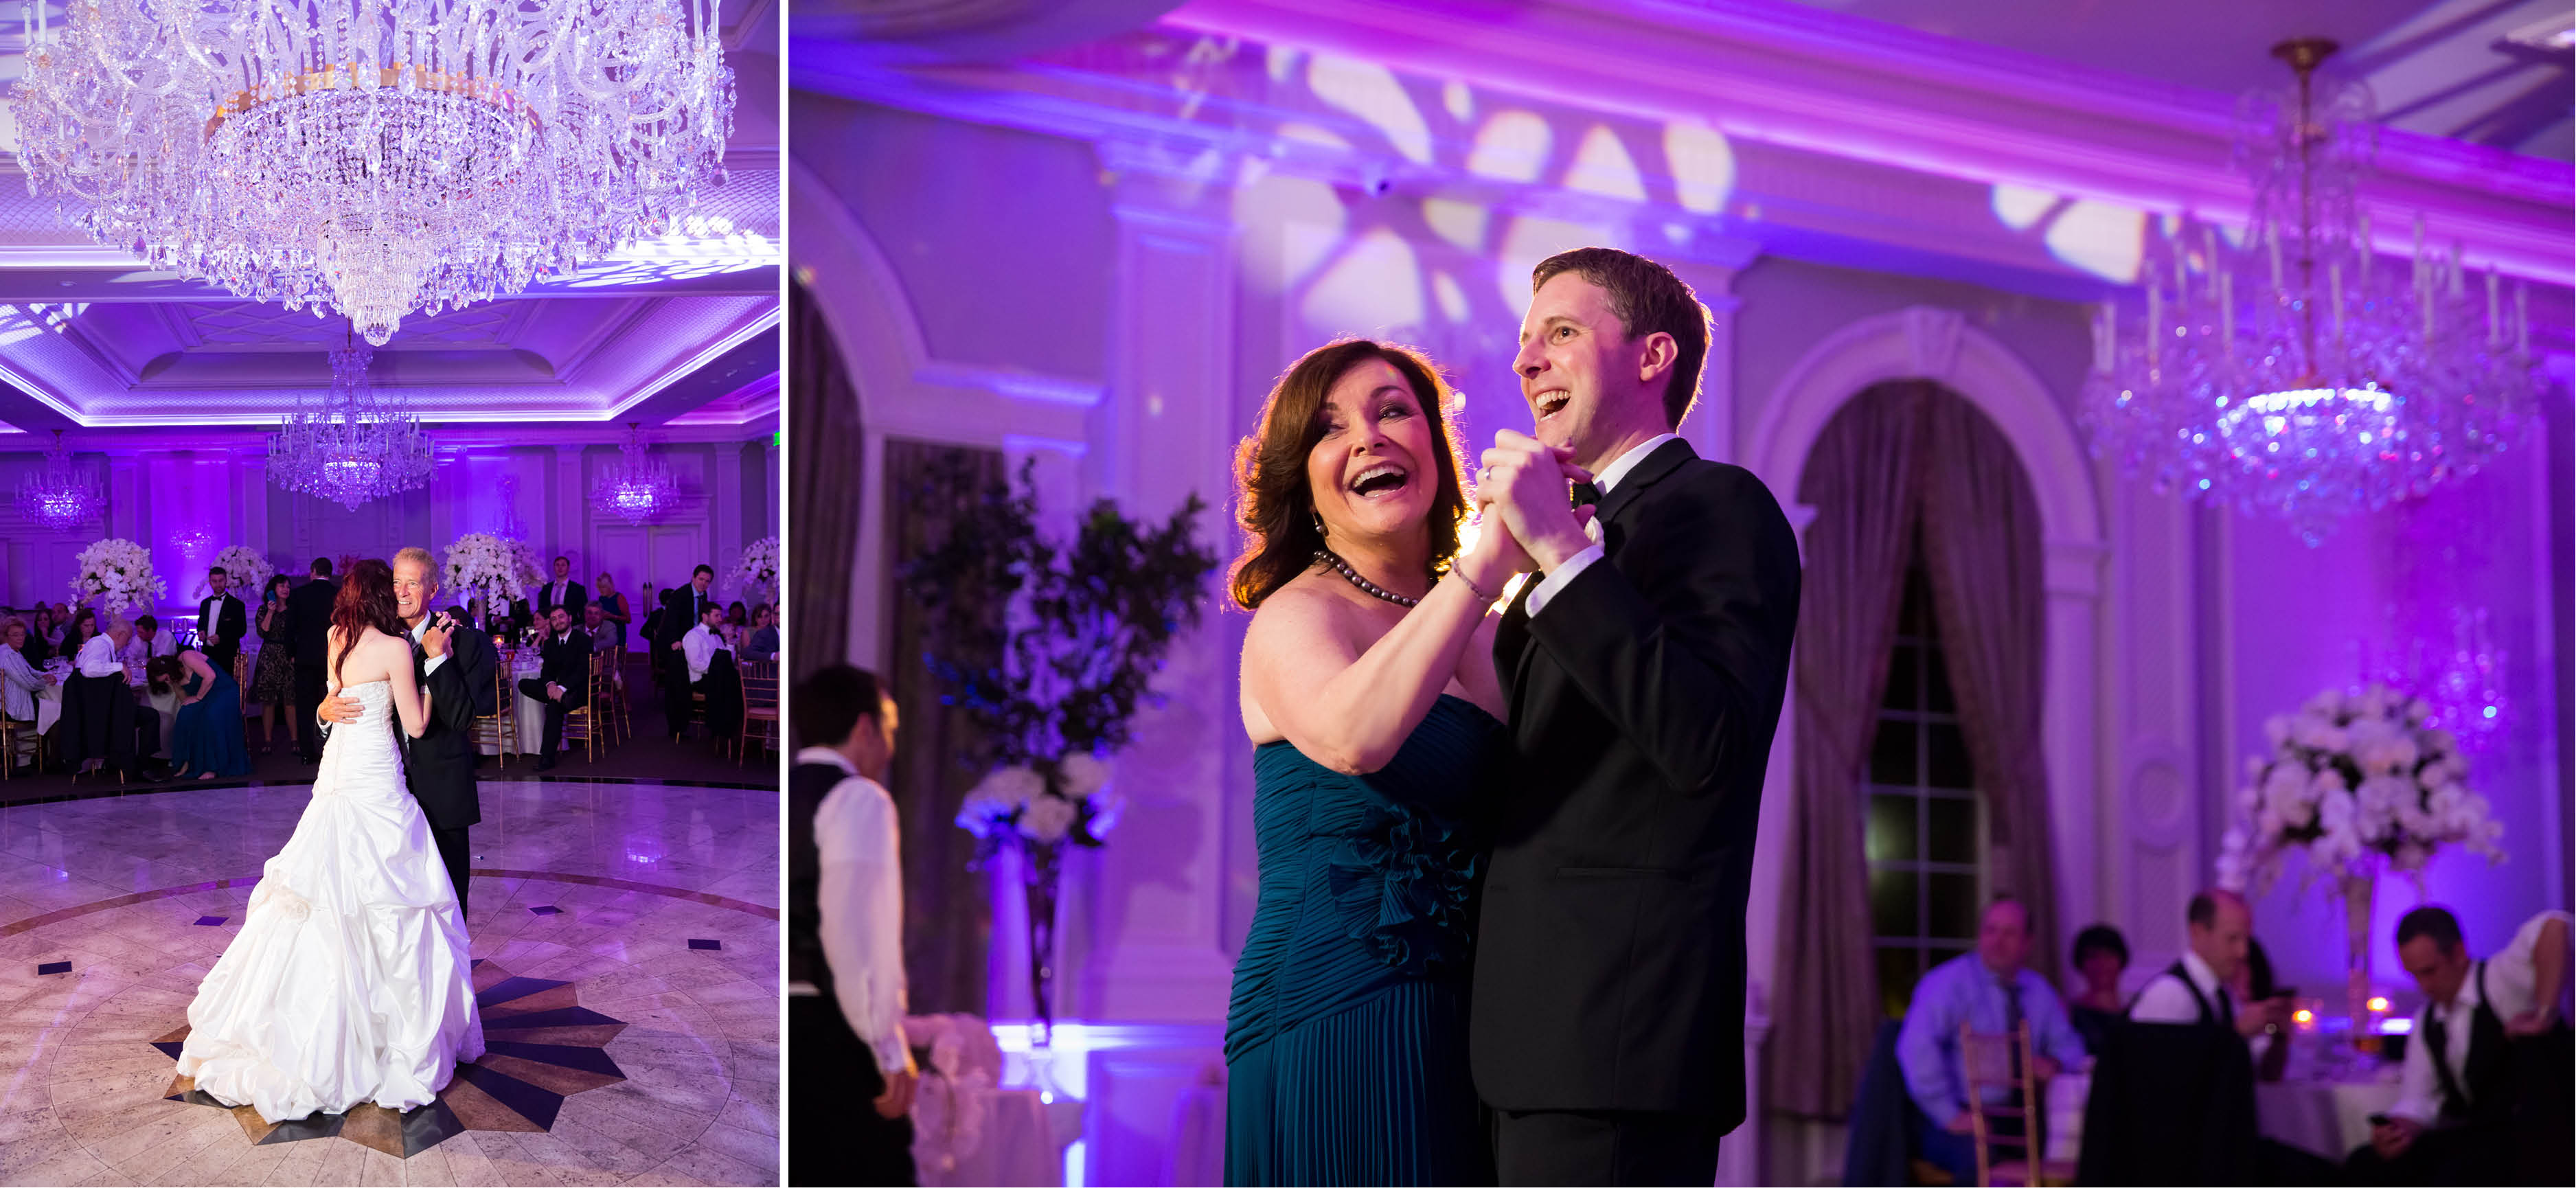 Emma_cleary_photography the Rockleigh NJ wedding24